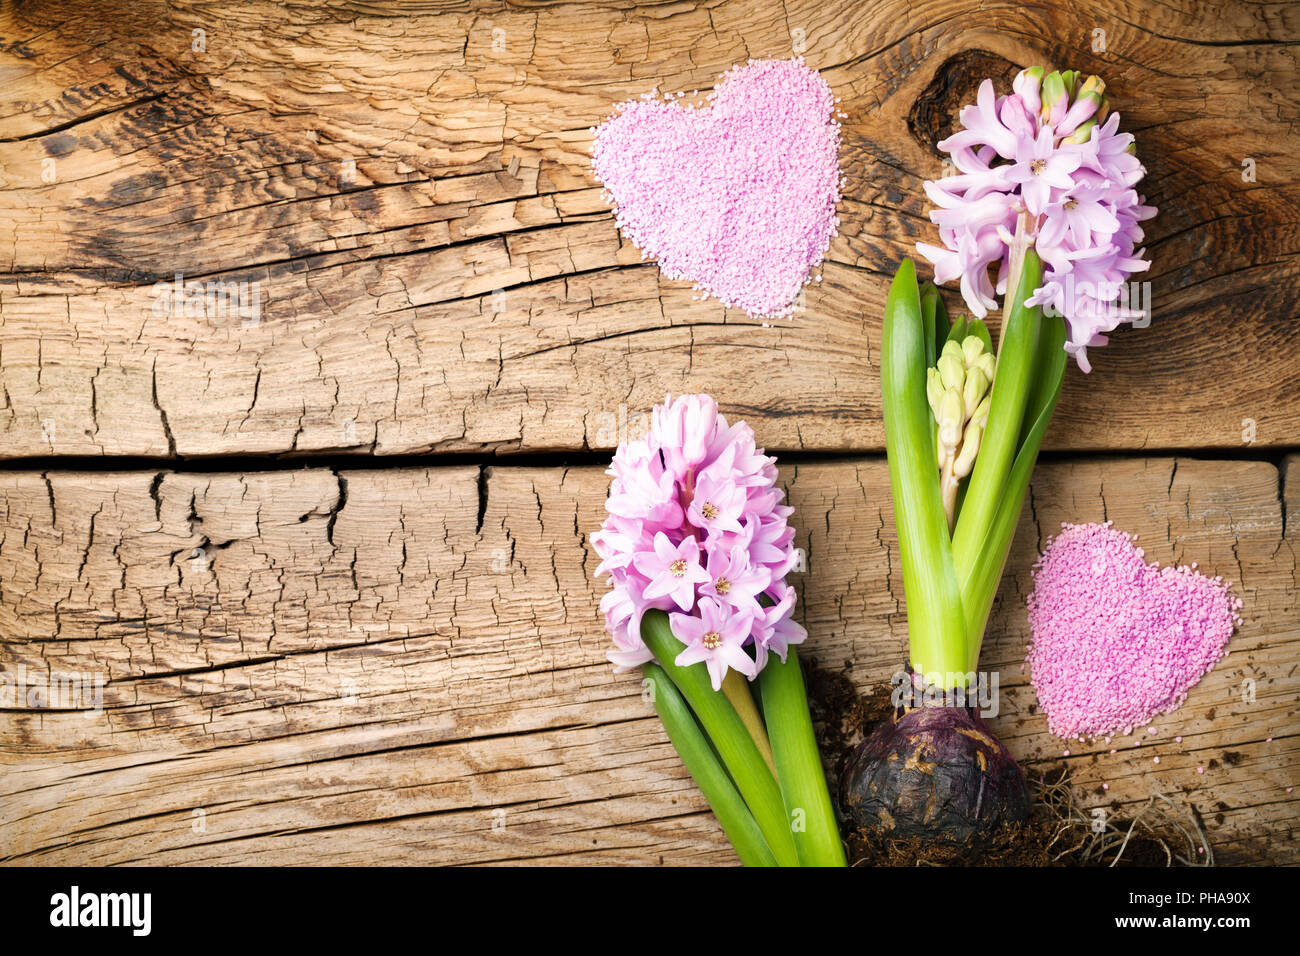 Gardening Background with Hyacinth Flowers on Wooden Table Stock Photo